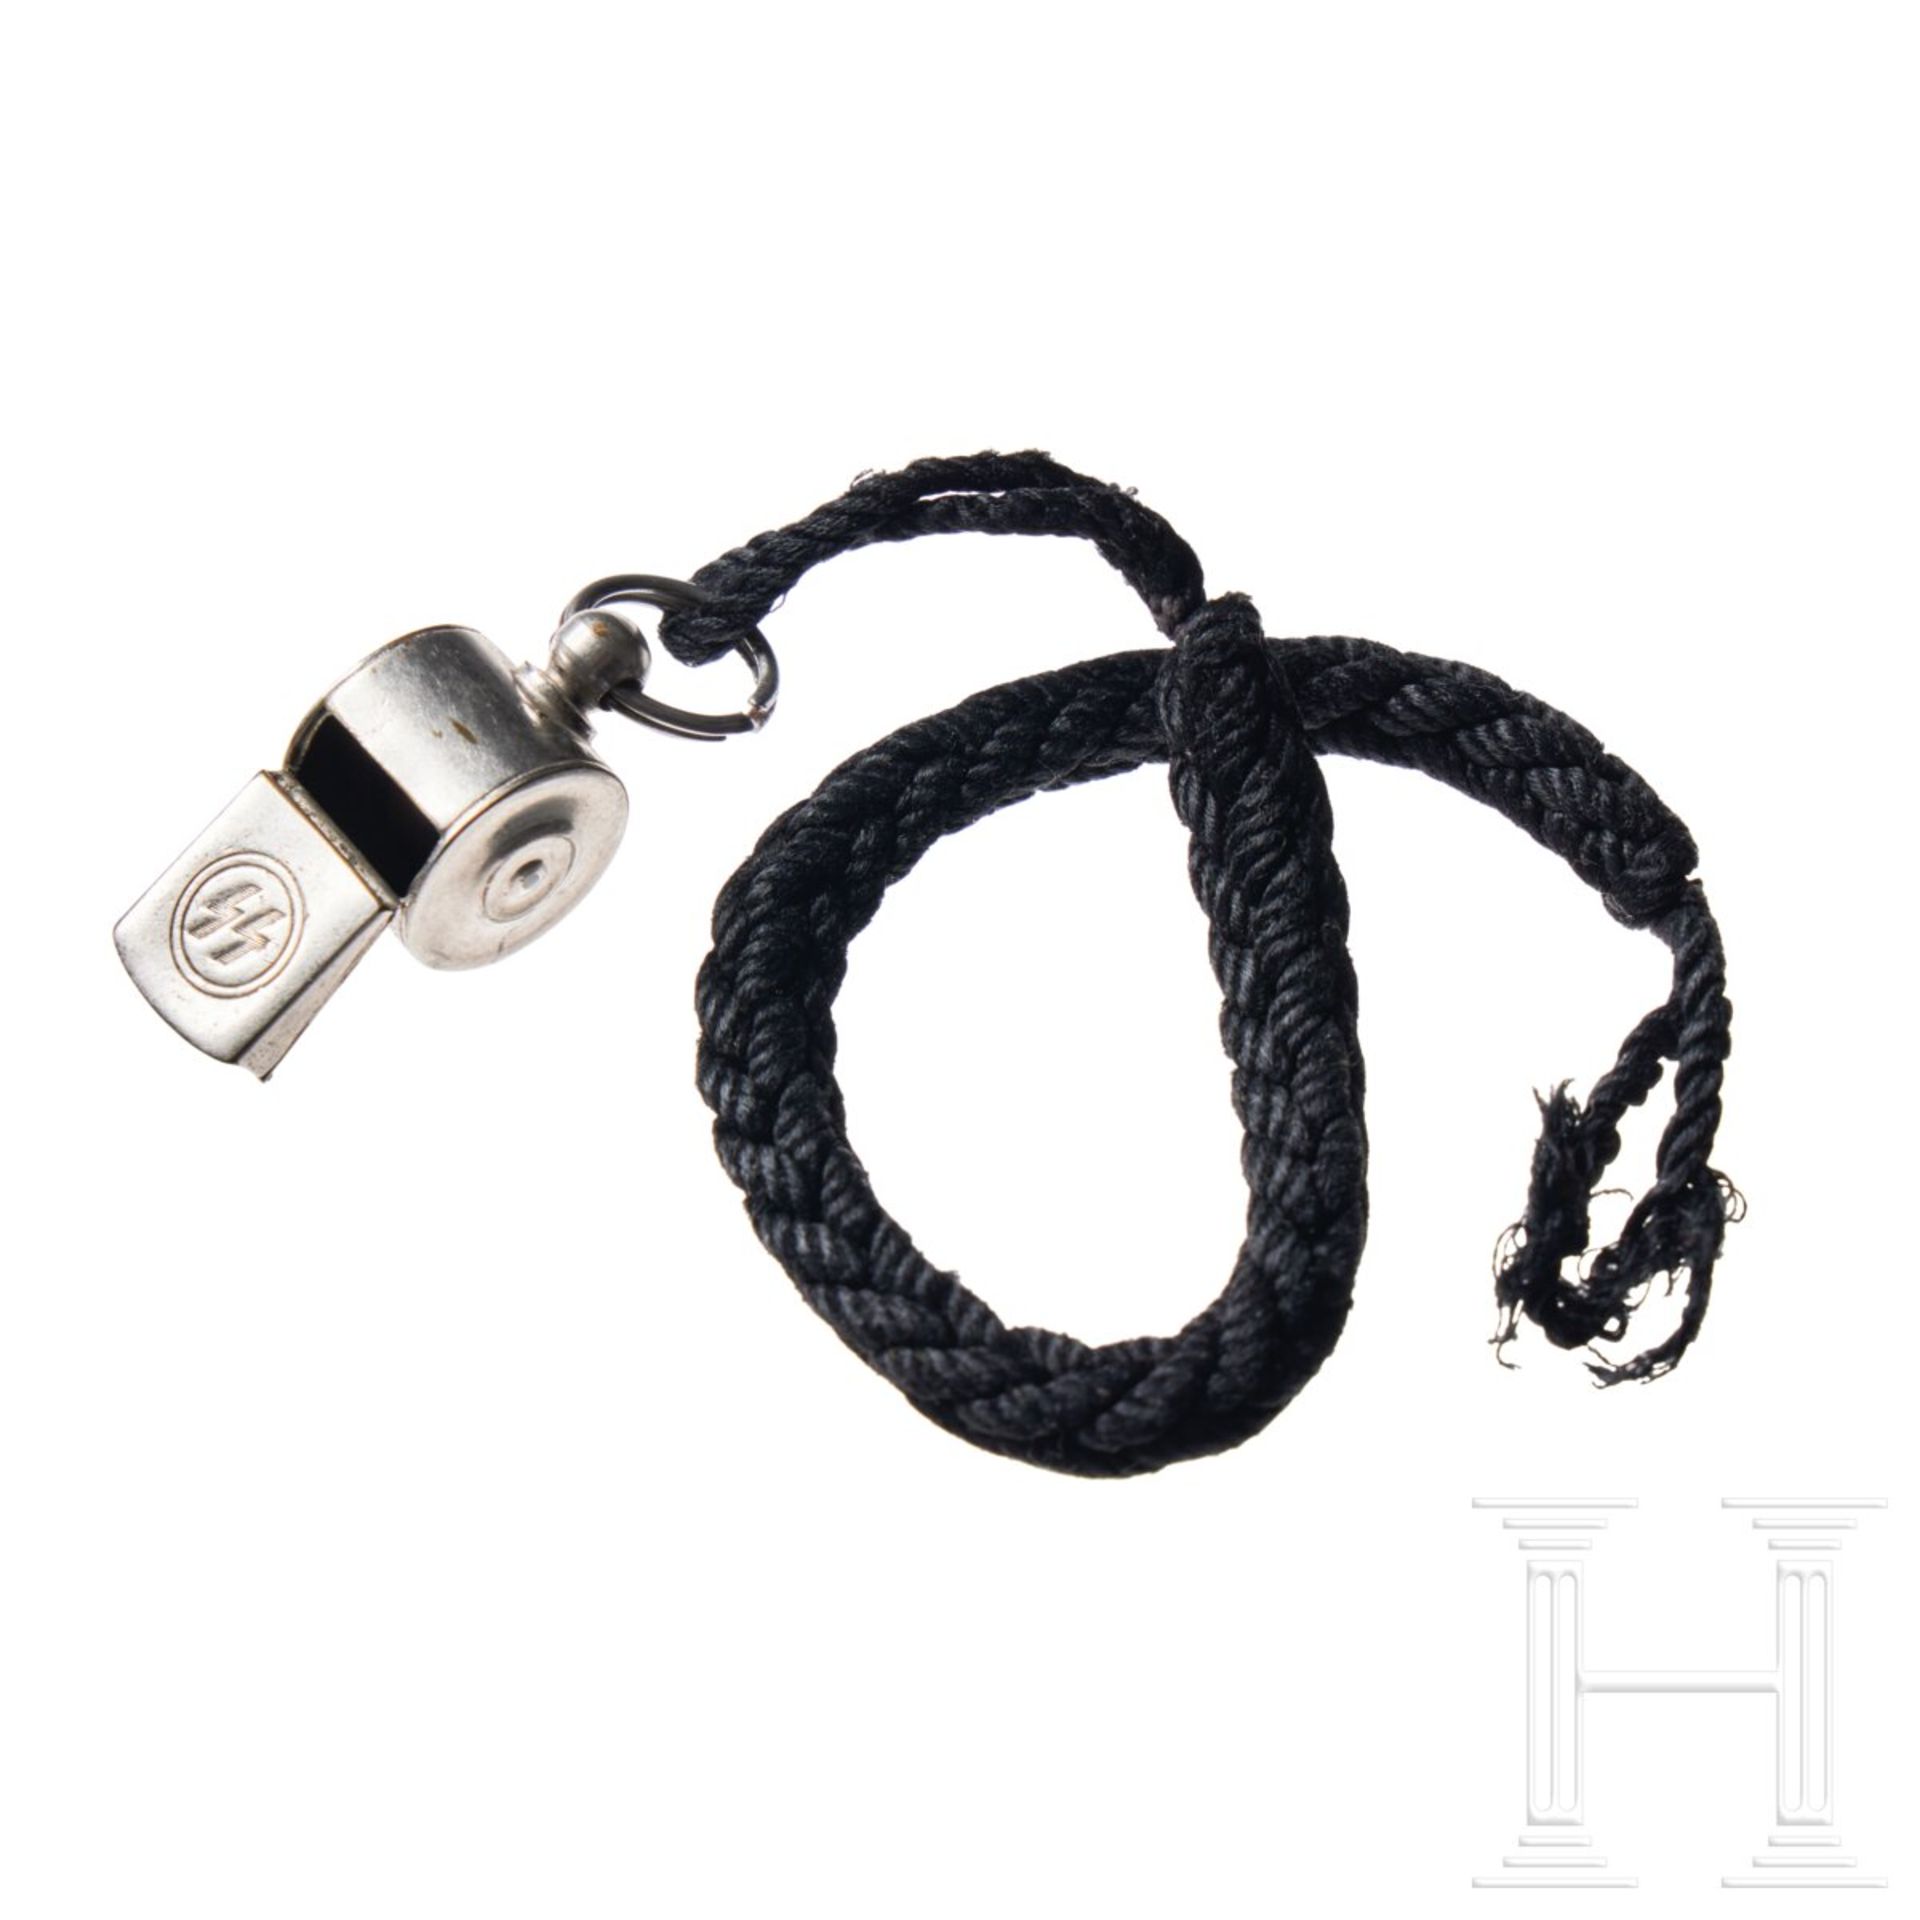 A SS Whistle Lanyard